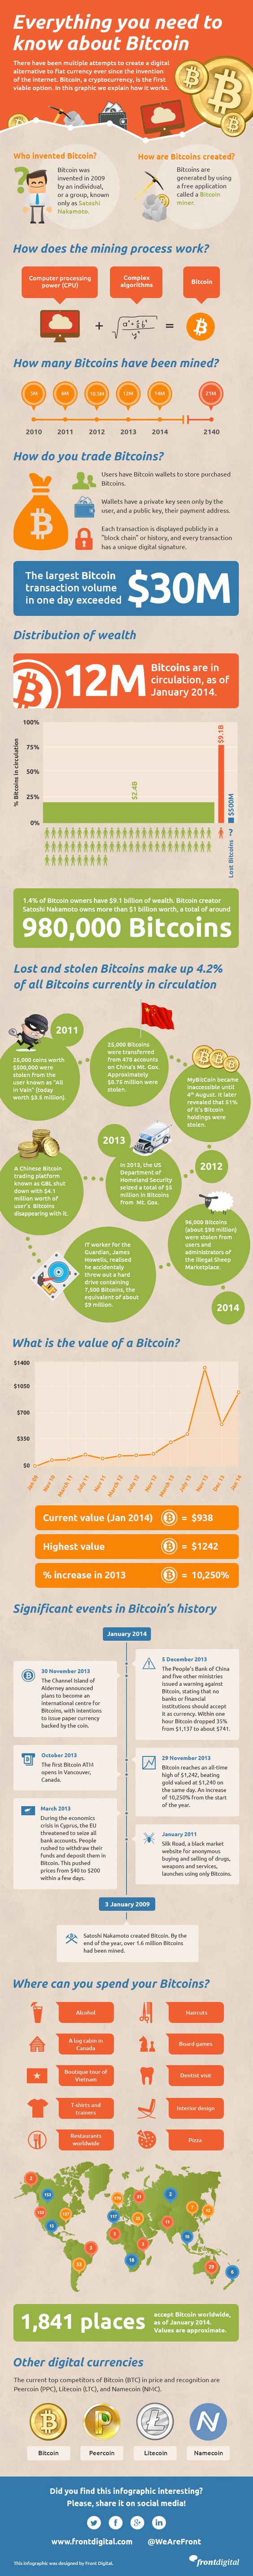 Everythinh You Need to Know About Bitcoin.jpg